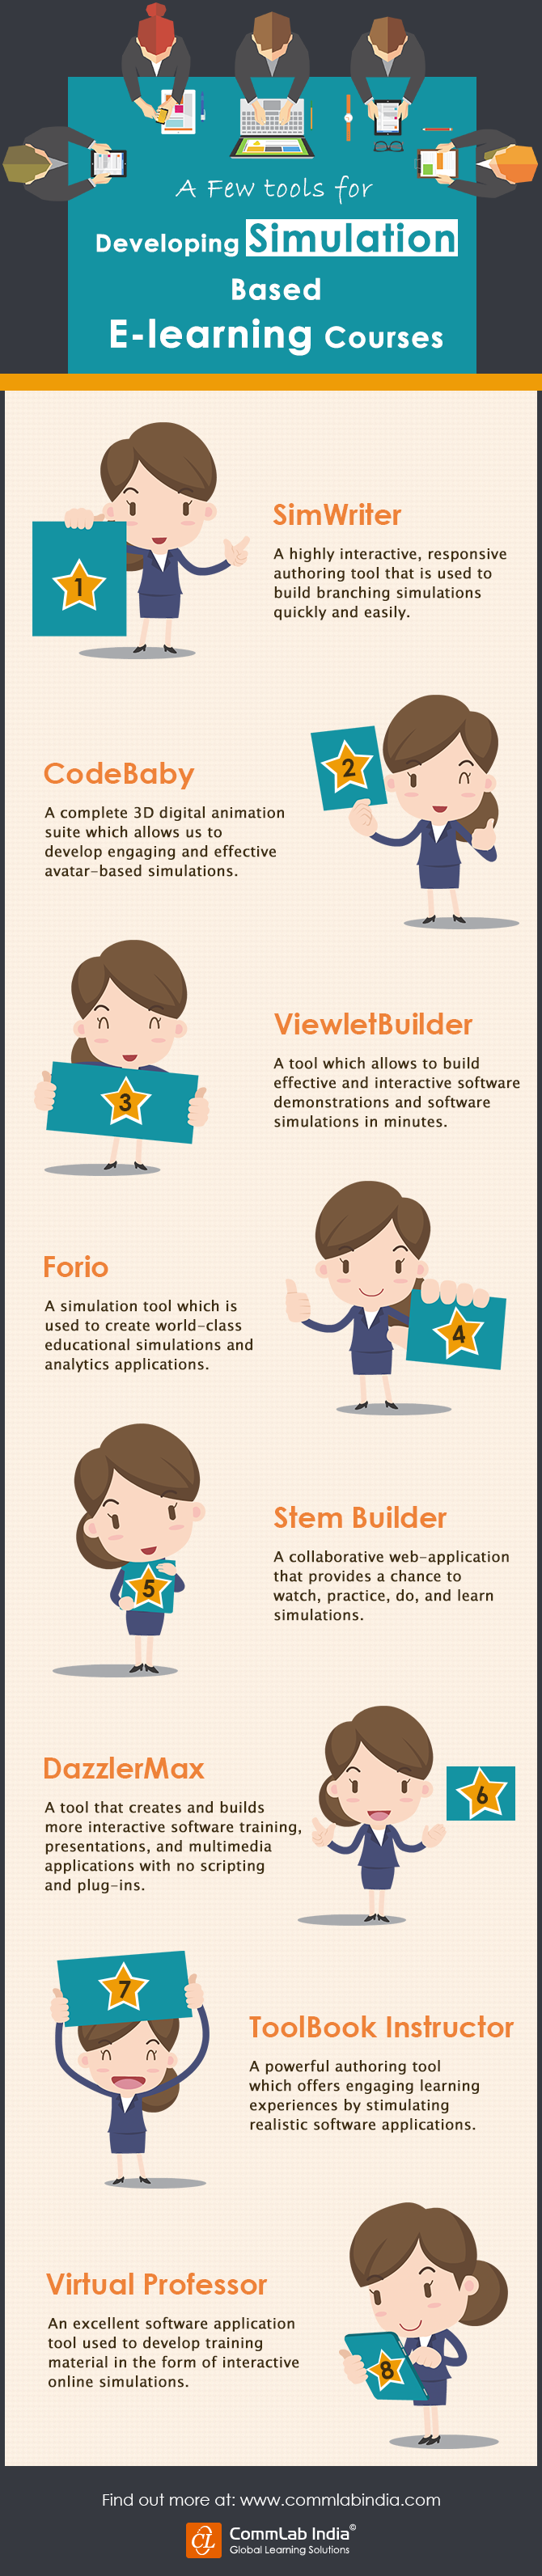 A Few Tools for Developing Simulations Based E-learning Courses [Infographic]